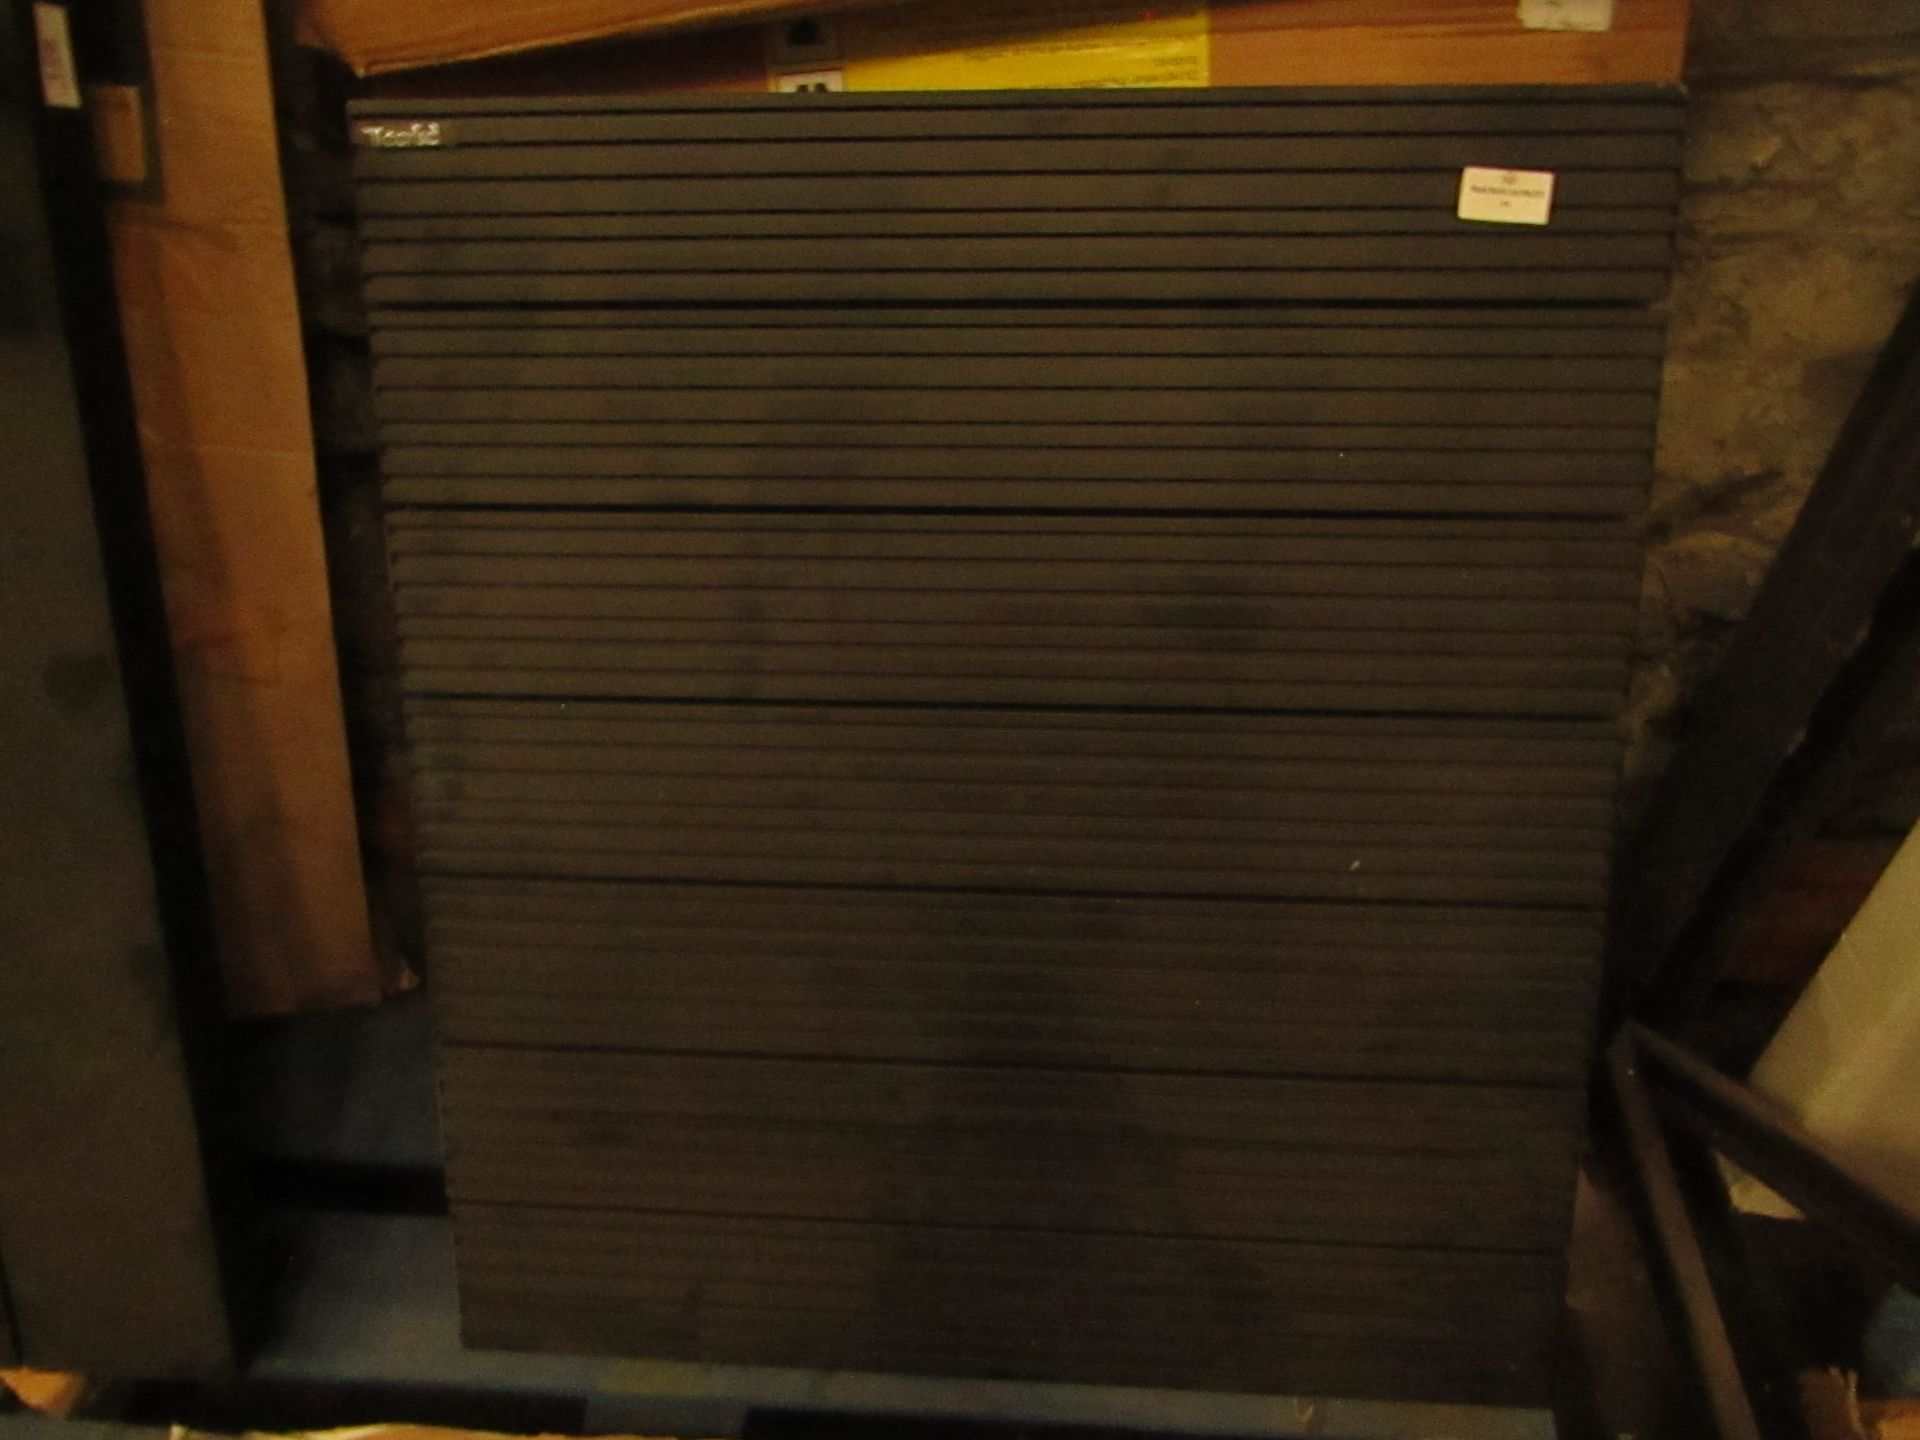 Carisa - Monza Textured Black Radiator - 600x660mm - Looks In Good Condition & Boxed, Viewing